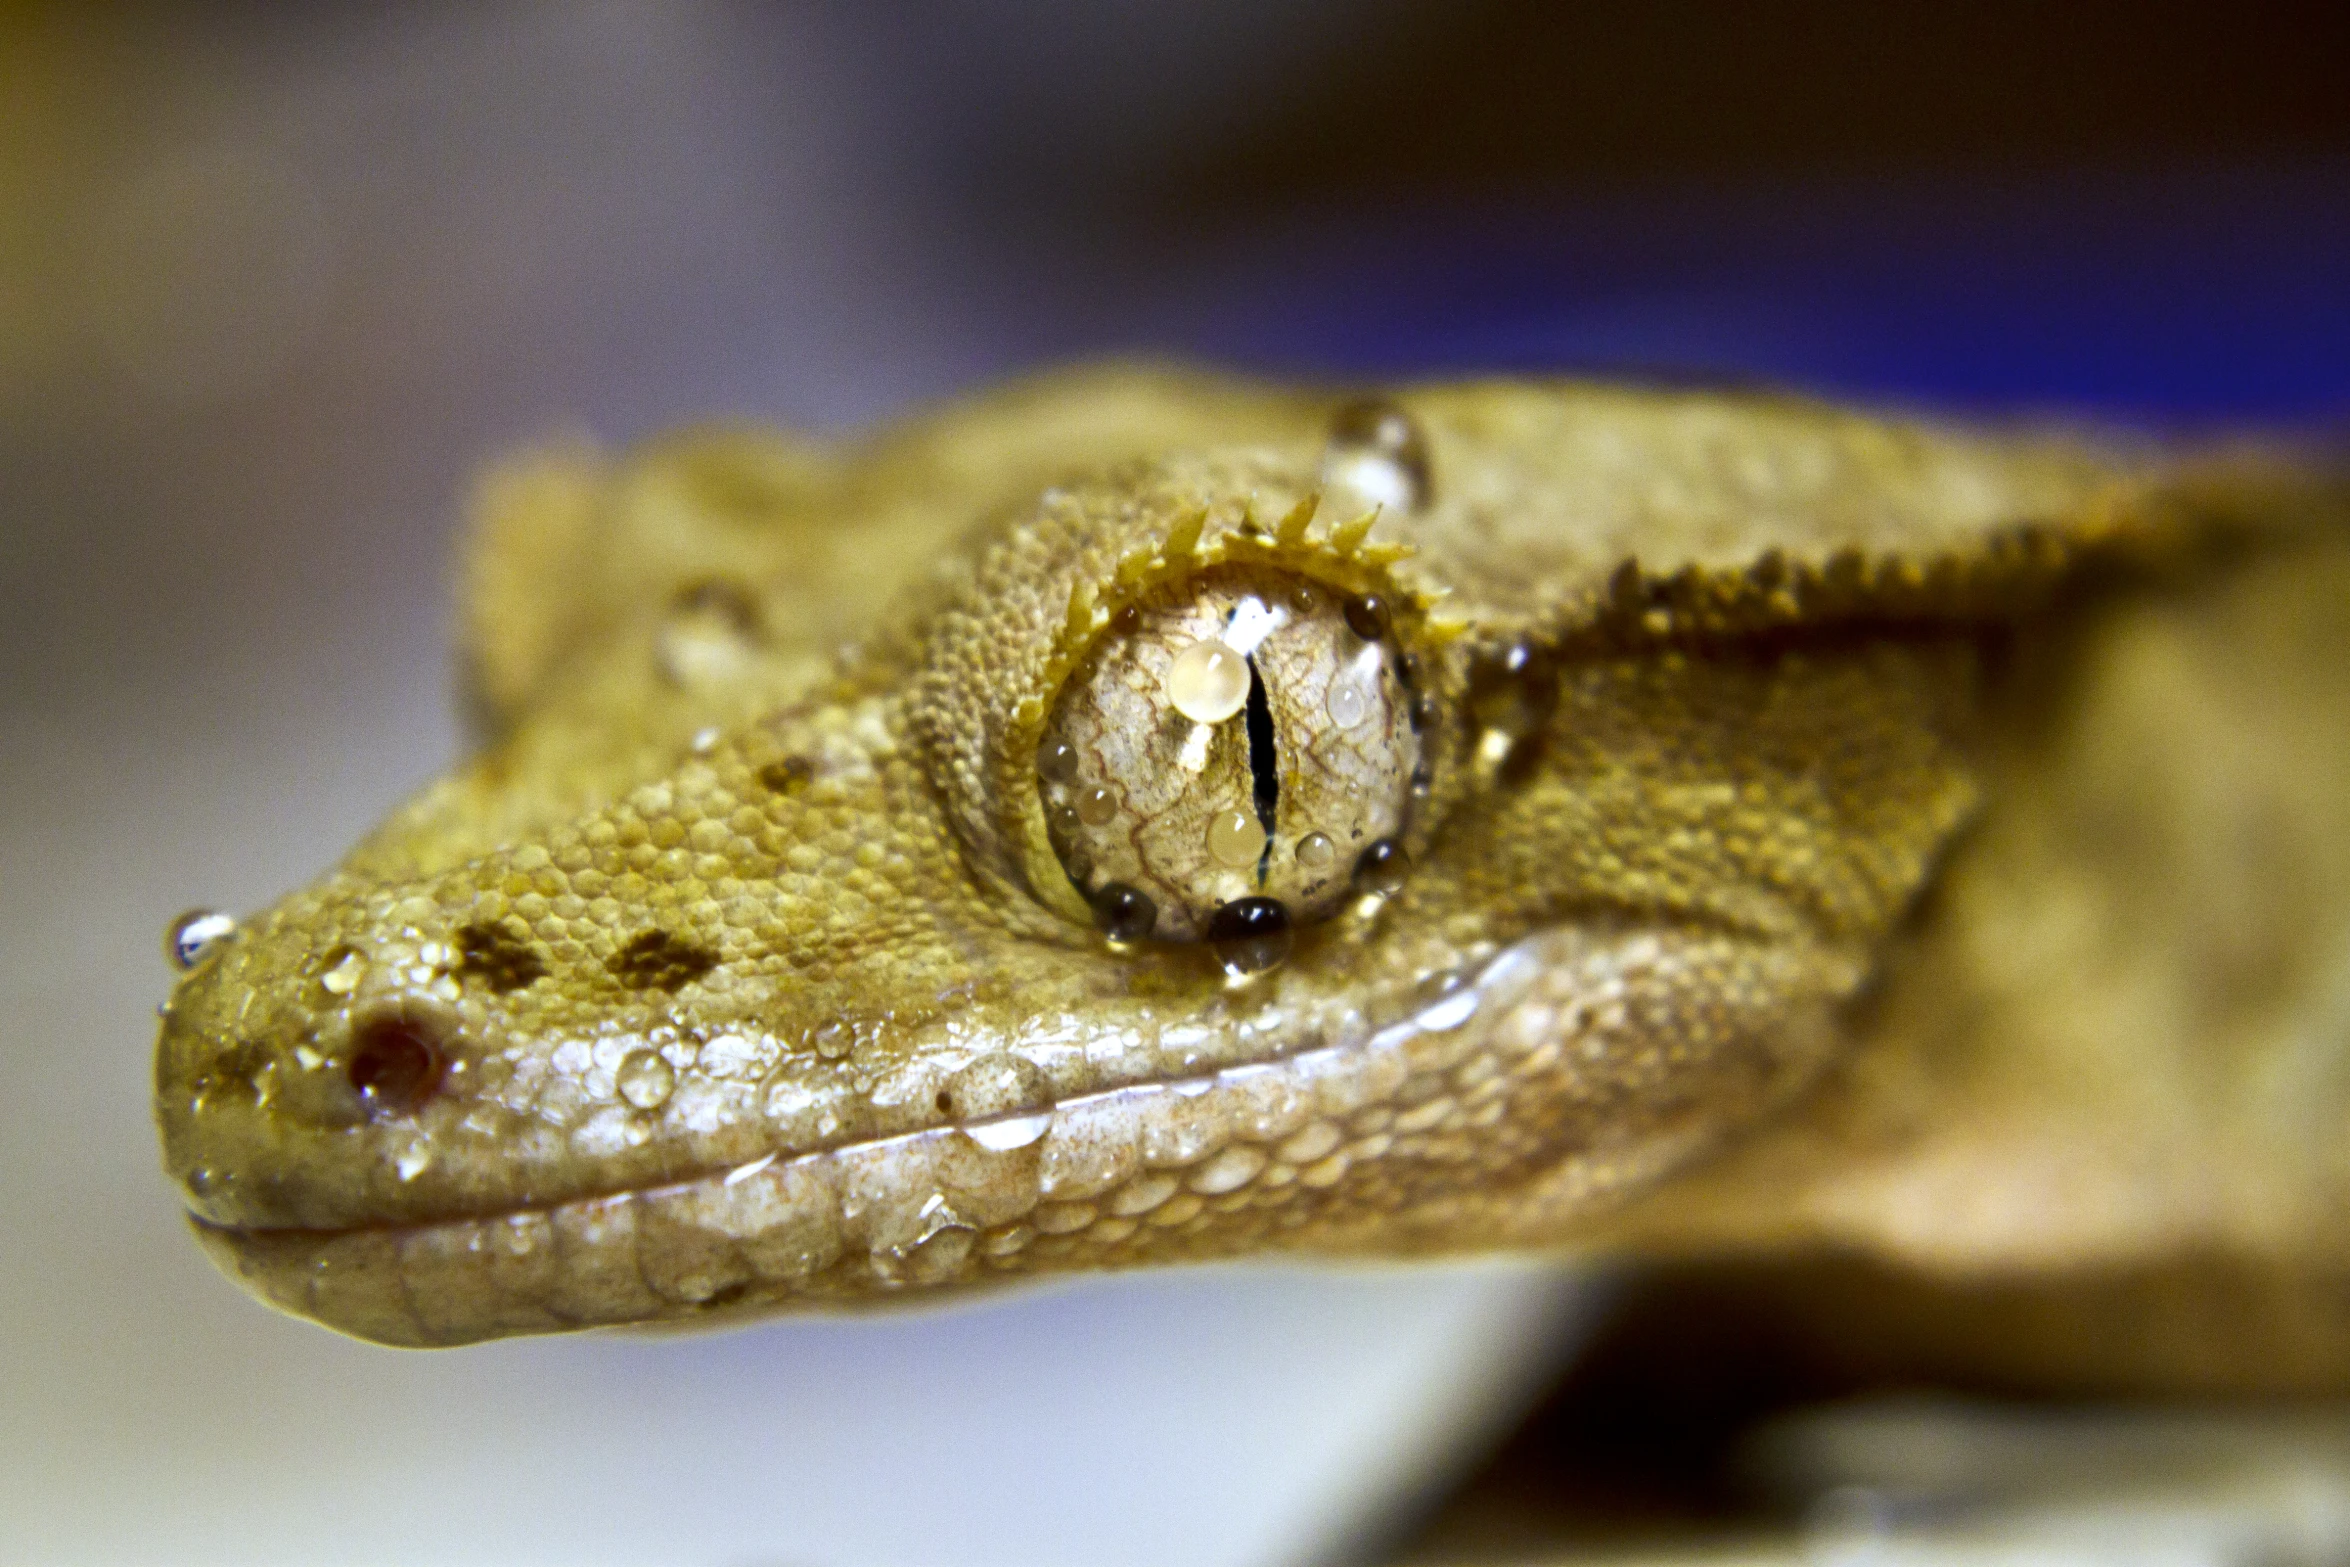 the head and neck of a large brown lizard